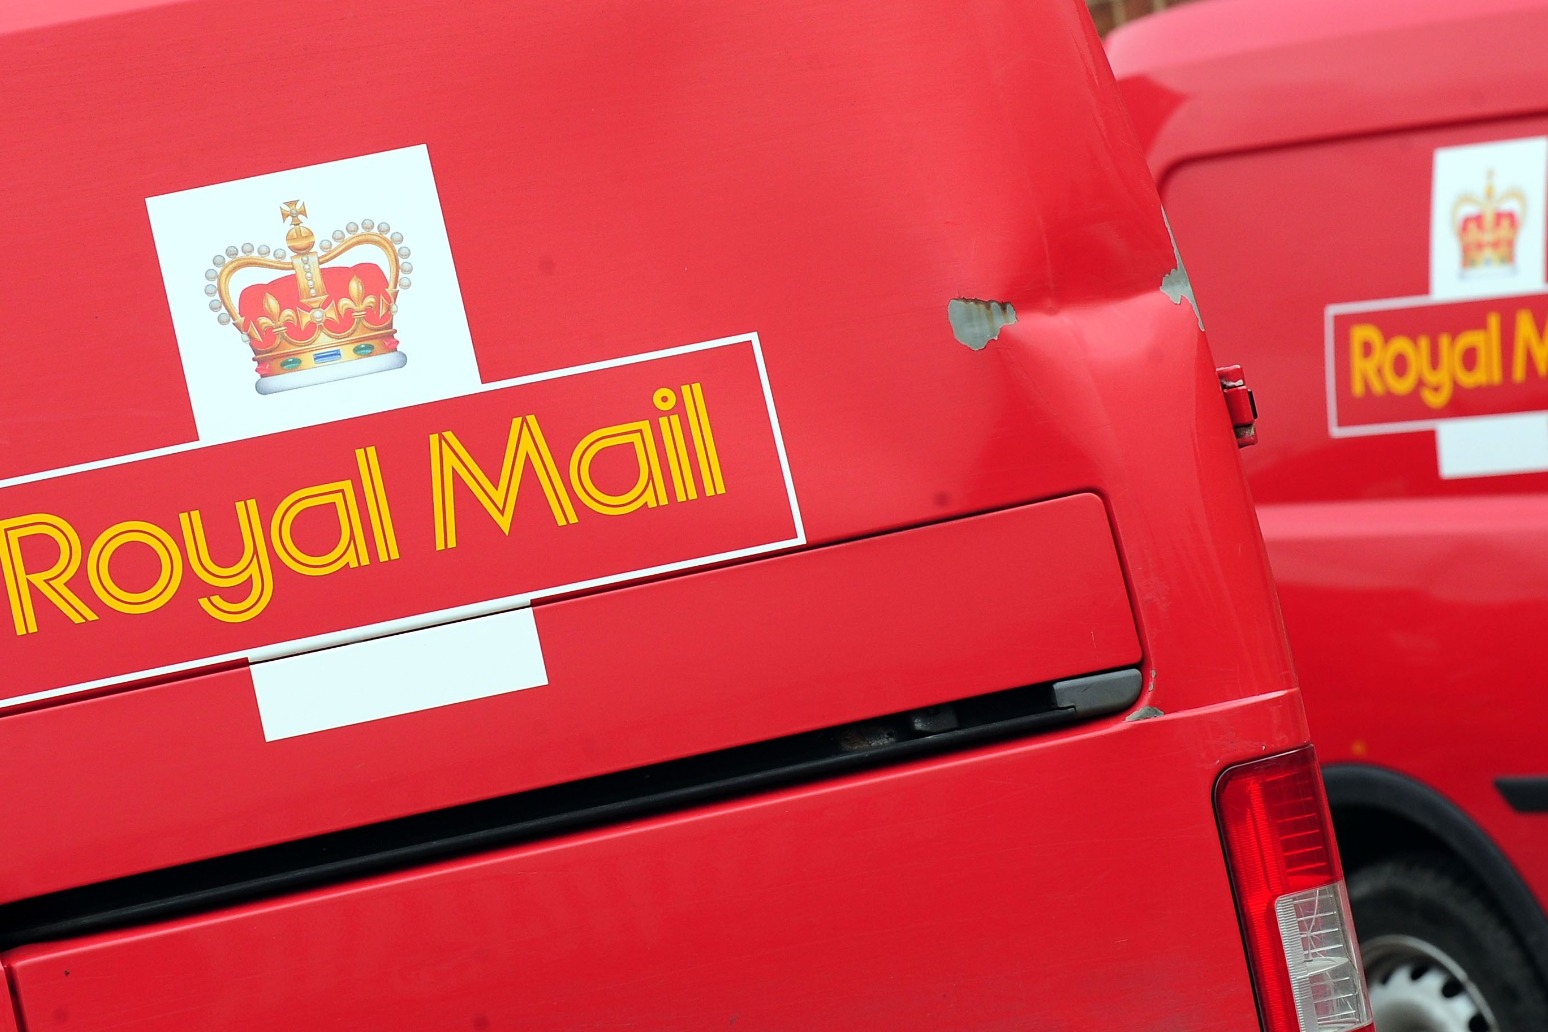 Royal Mail loses £1m a day as staff disputes stall turnaround plans 